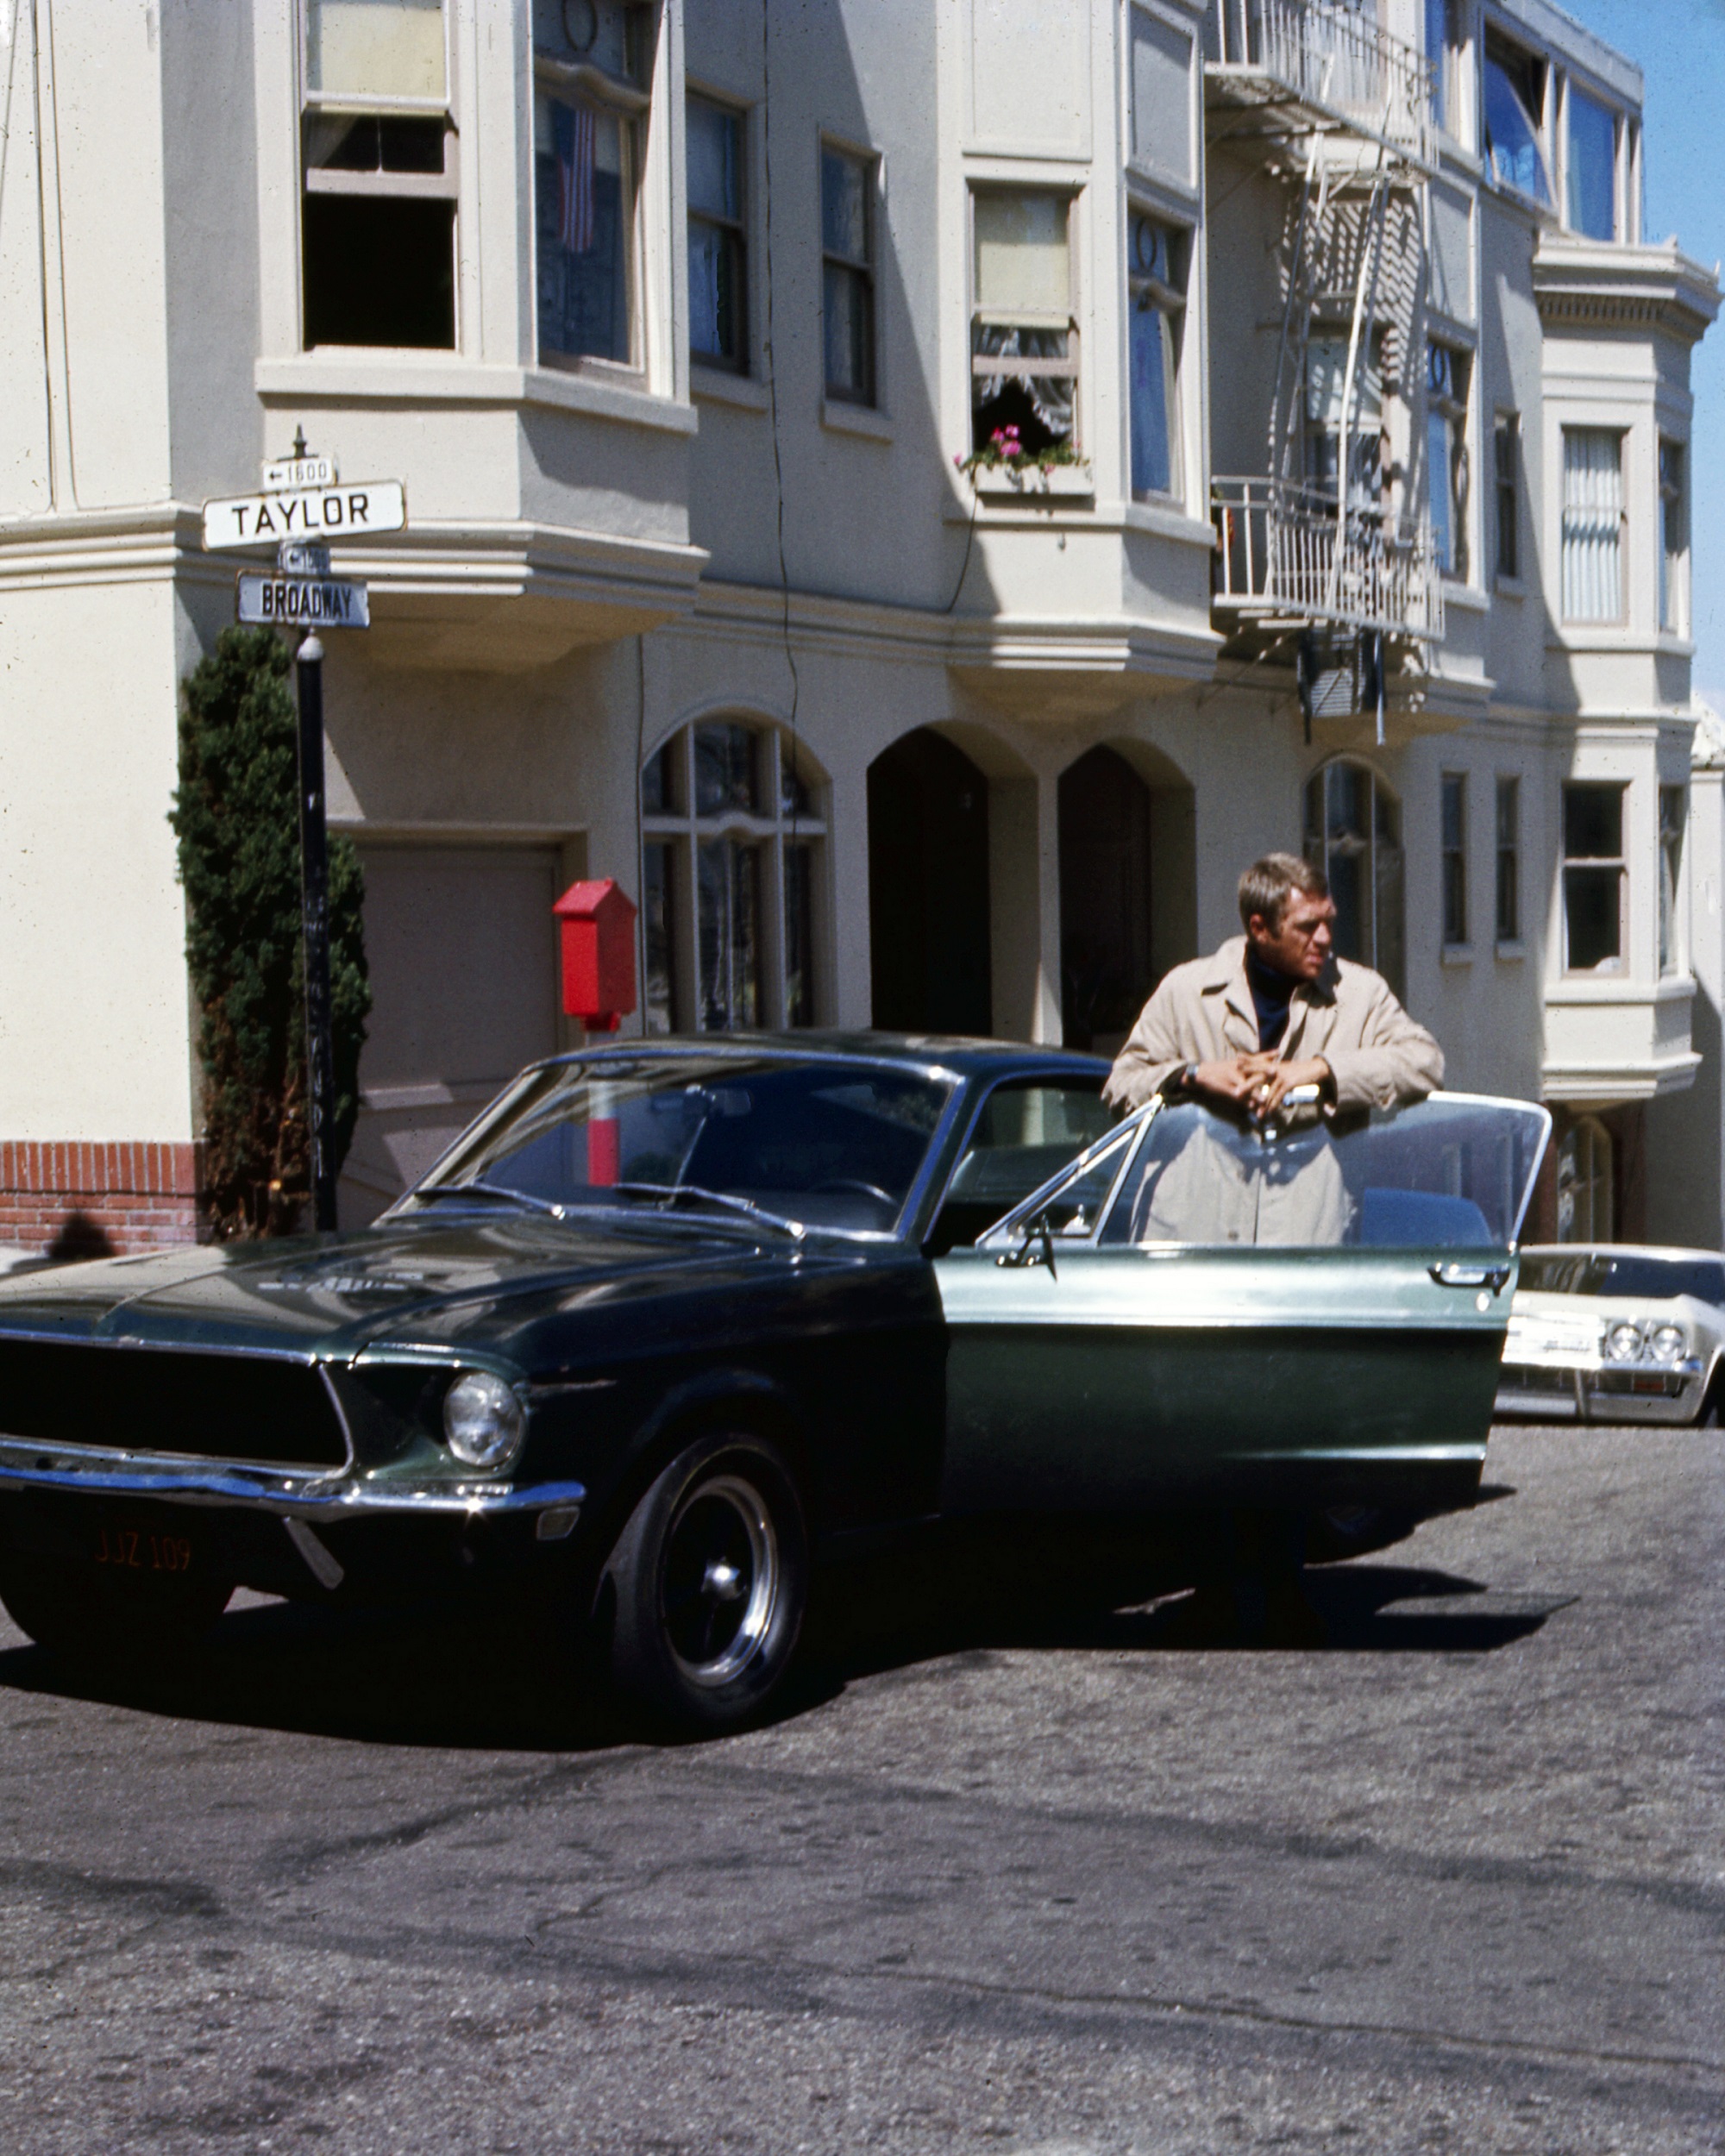 Steve McQueen hangs out with a Ford Mustang Bullitt GT390, which Bradley Cooper will have to top in the Bullitt remake.